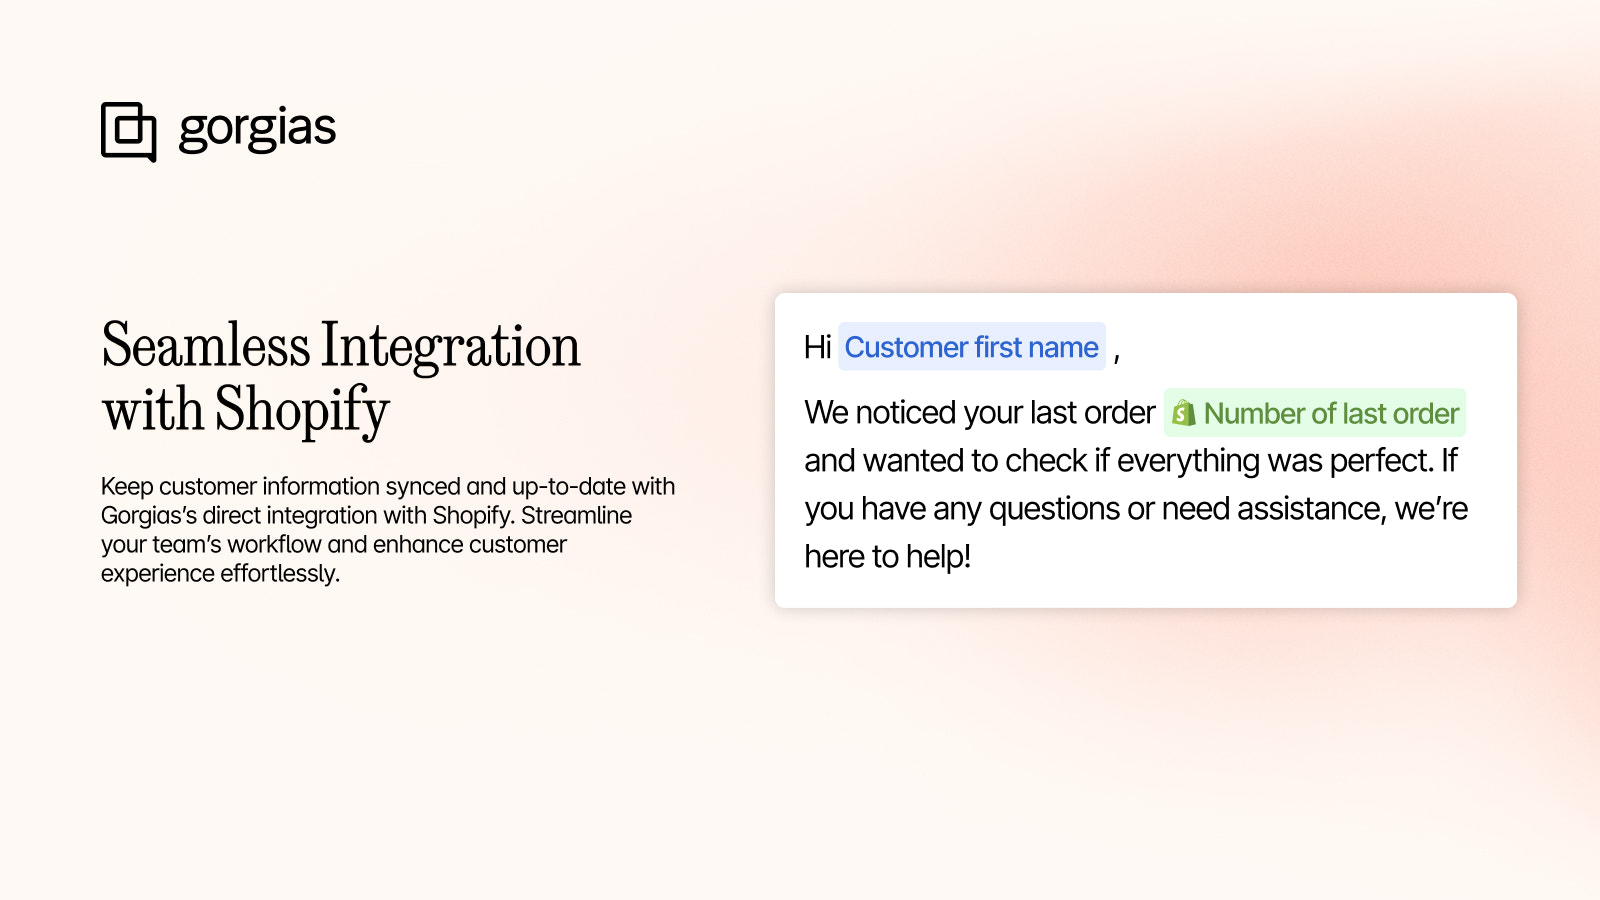 Seamless Integration with Shopify